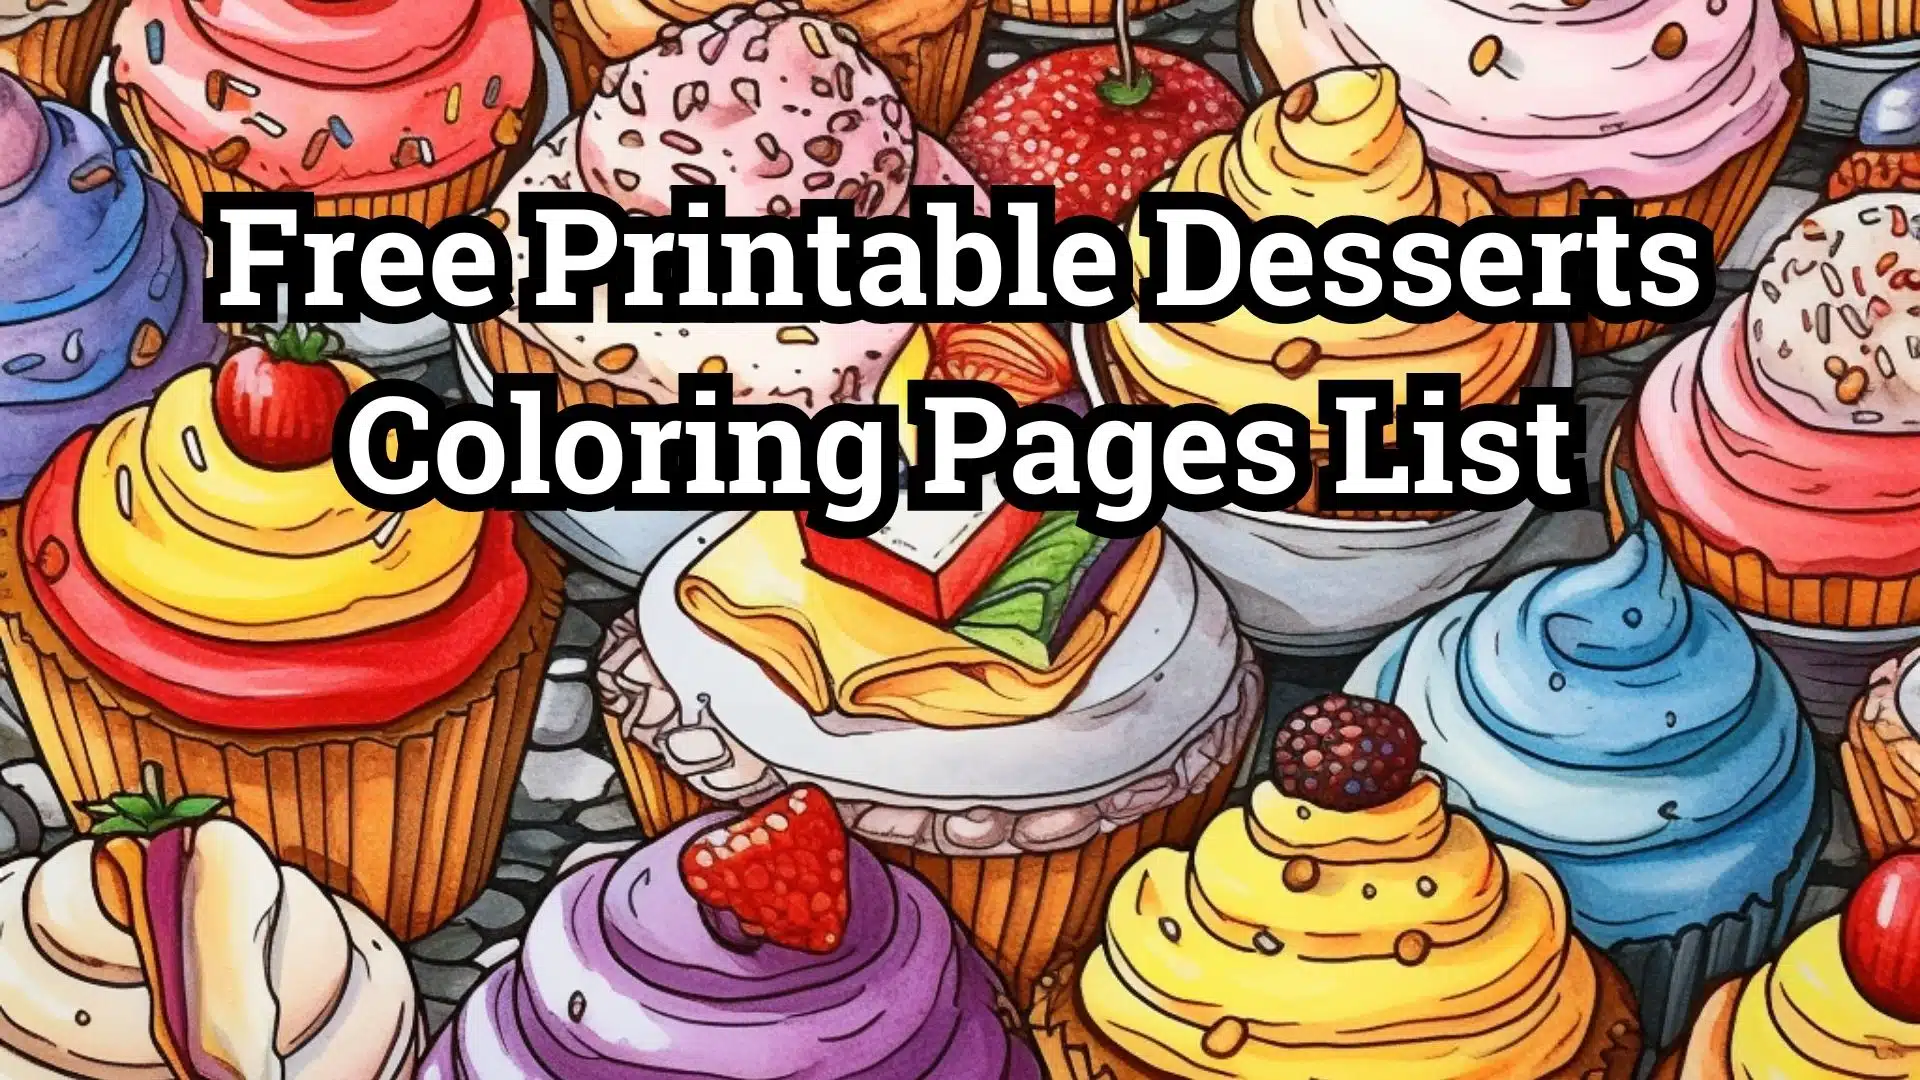 Free Printable Desserts Coloring Pages List